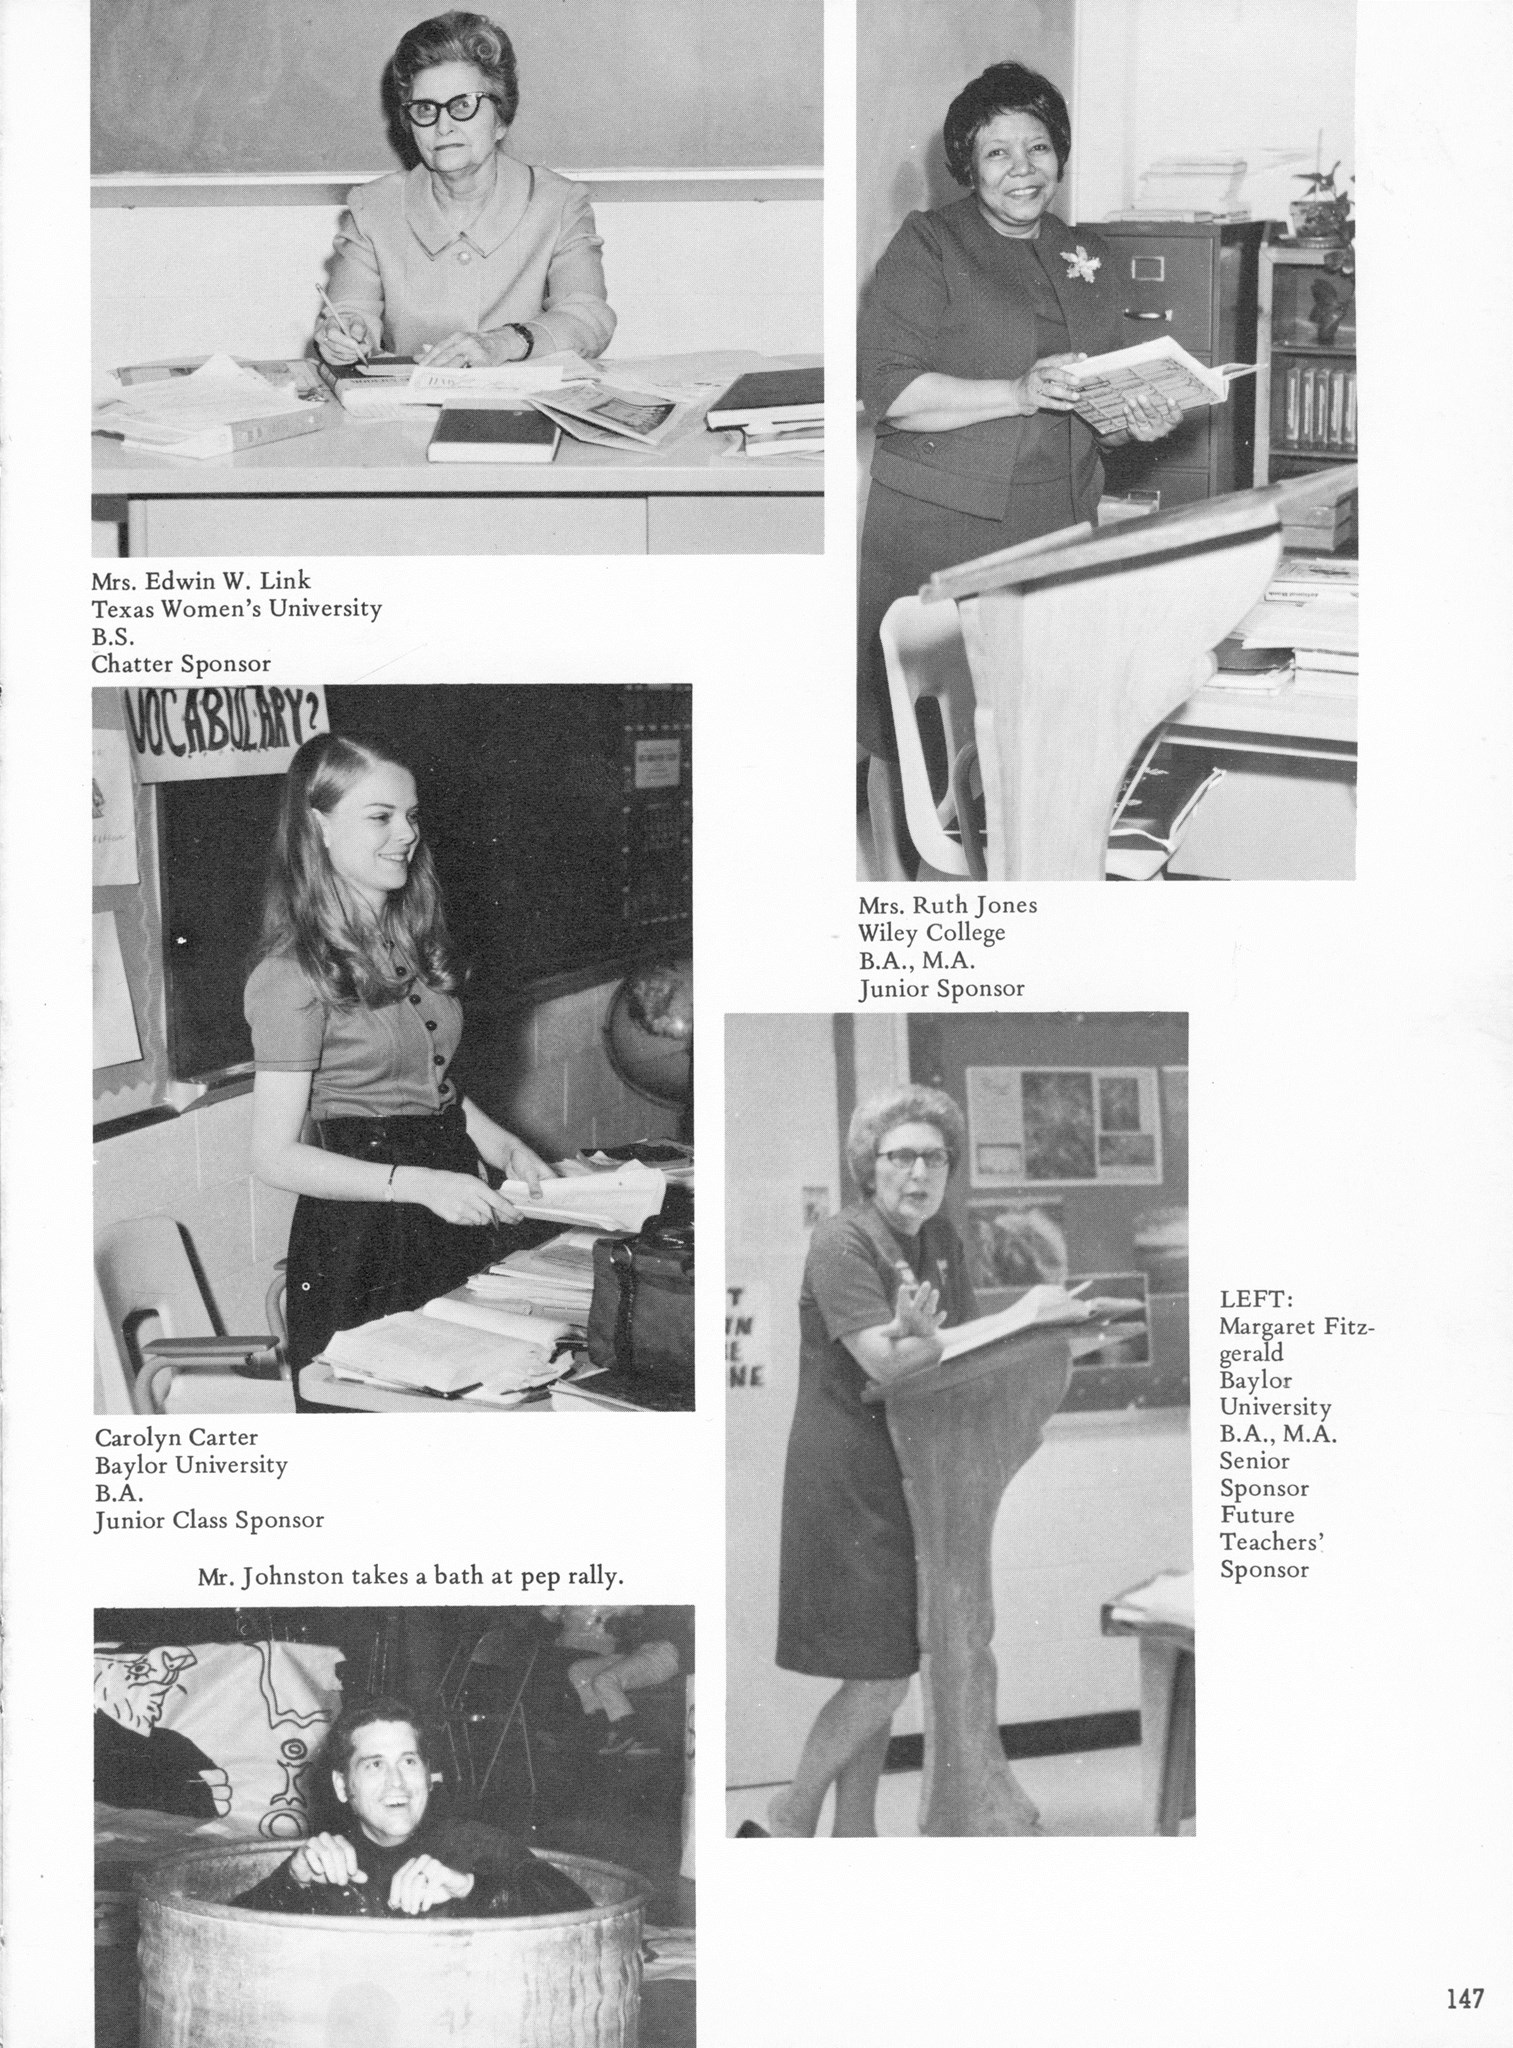 ../../../Images/Large/1971/Arclight-1971-pg0147.jpg